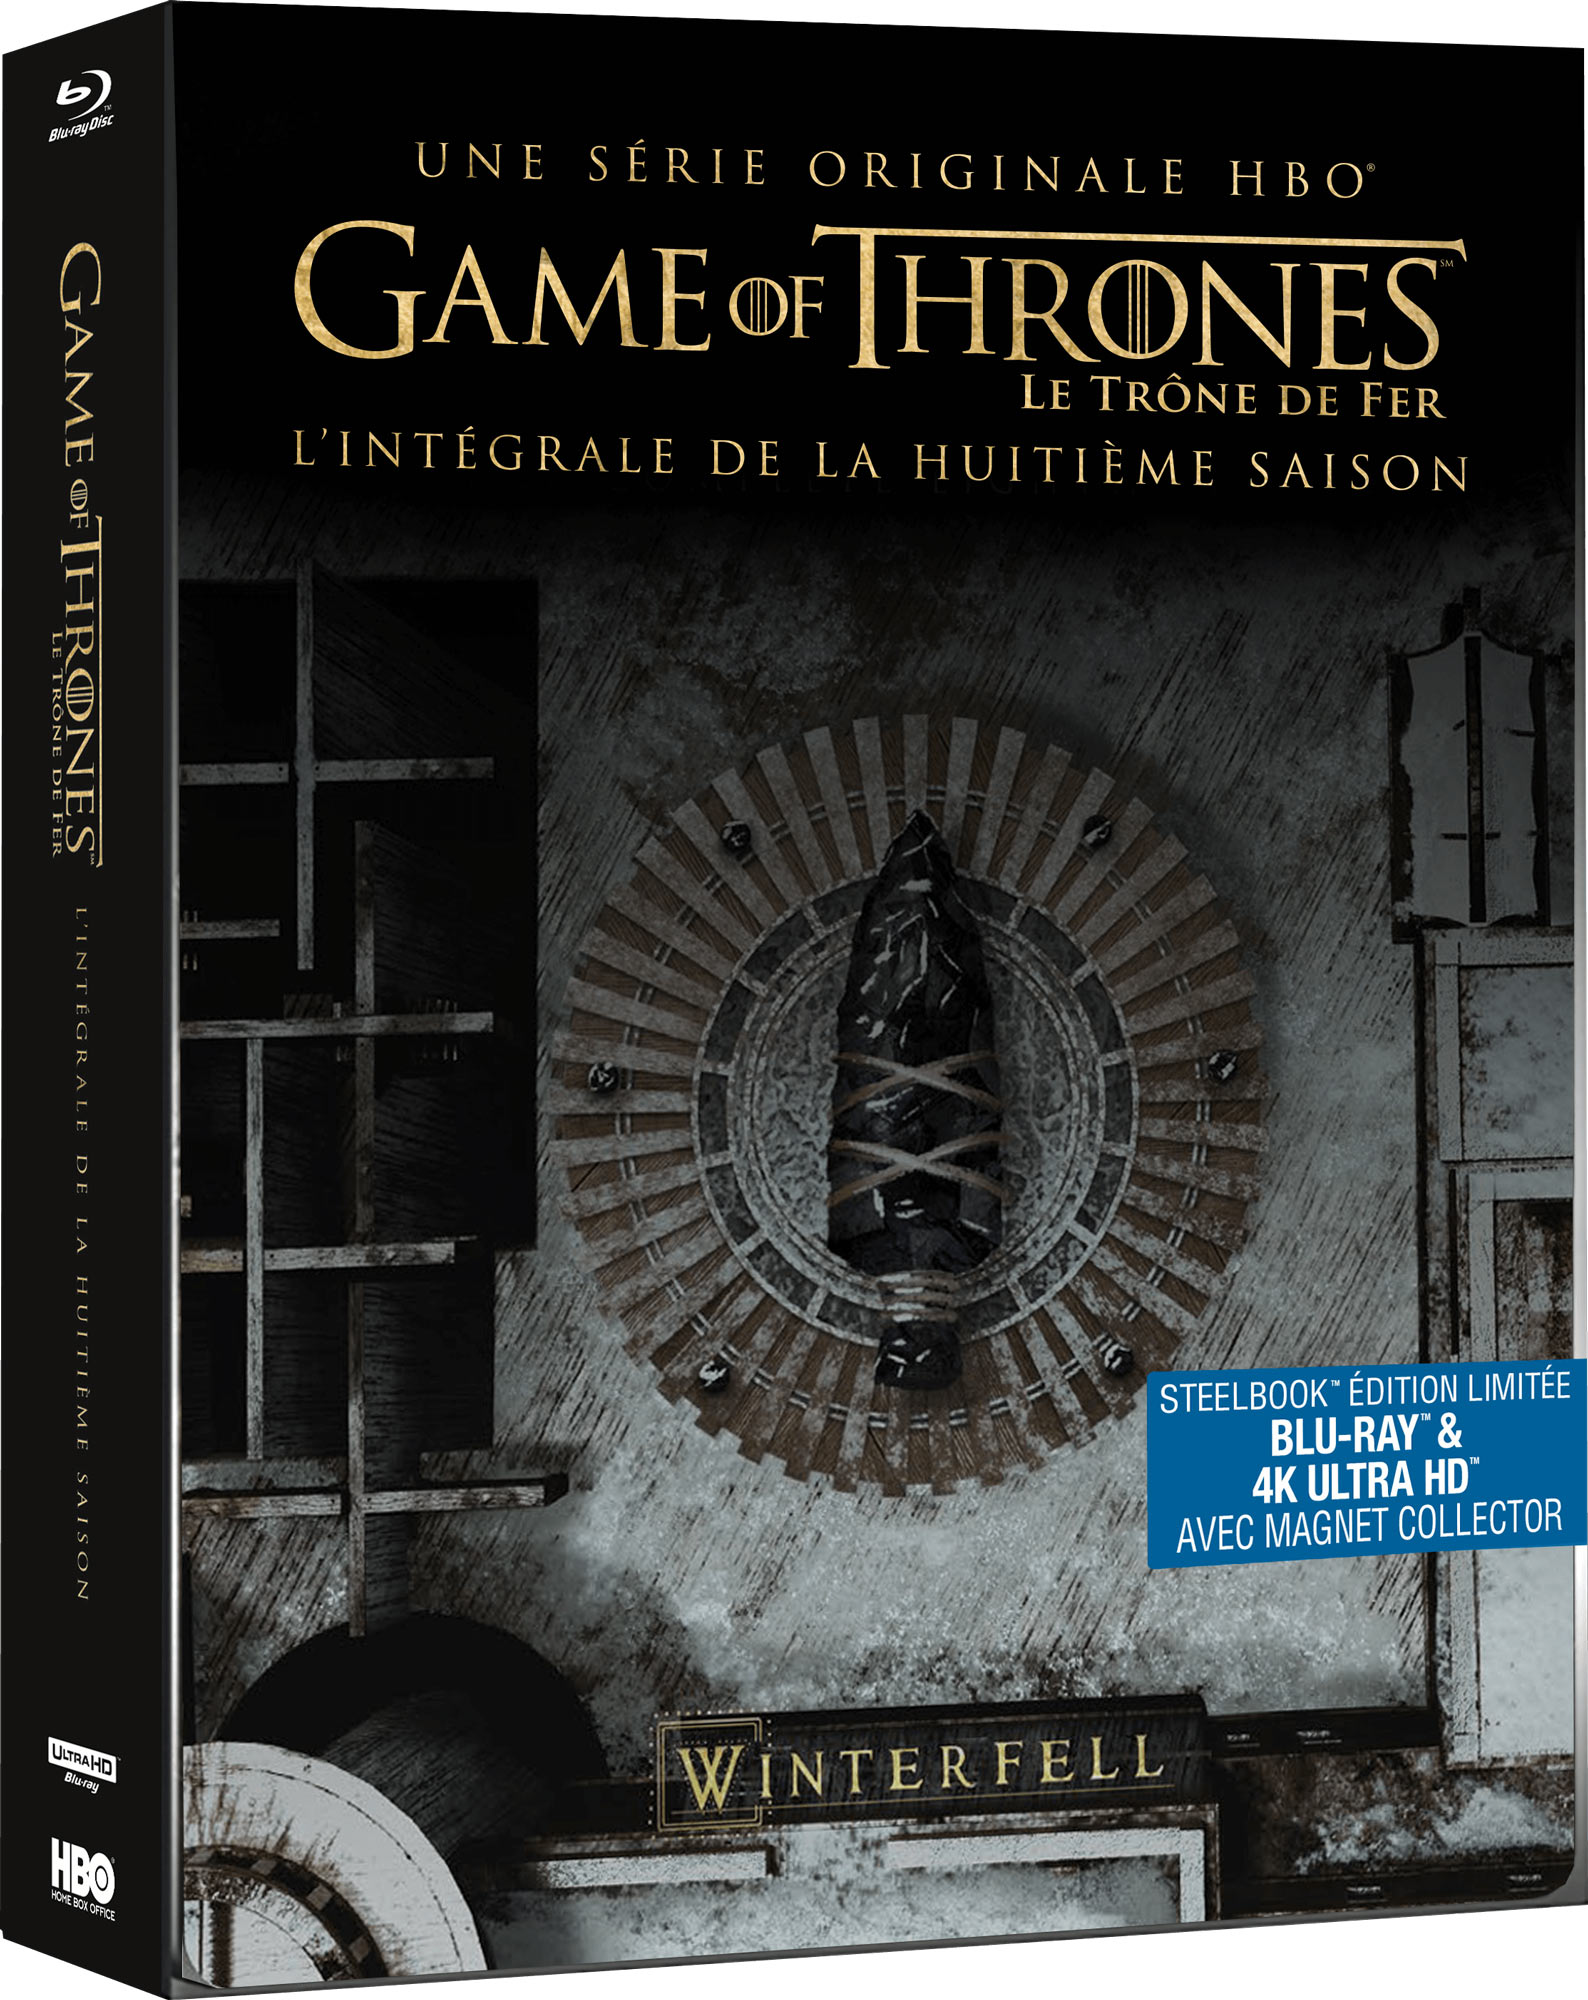 Game of Thrones - Saison 8 - SteelBook Blu-ray + 4K Ultra HD + Magnet collector